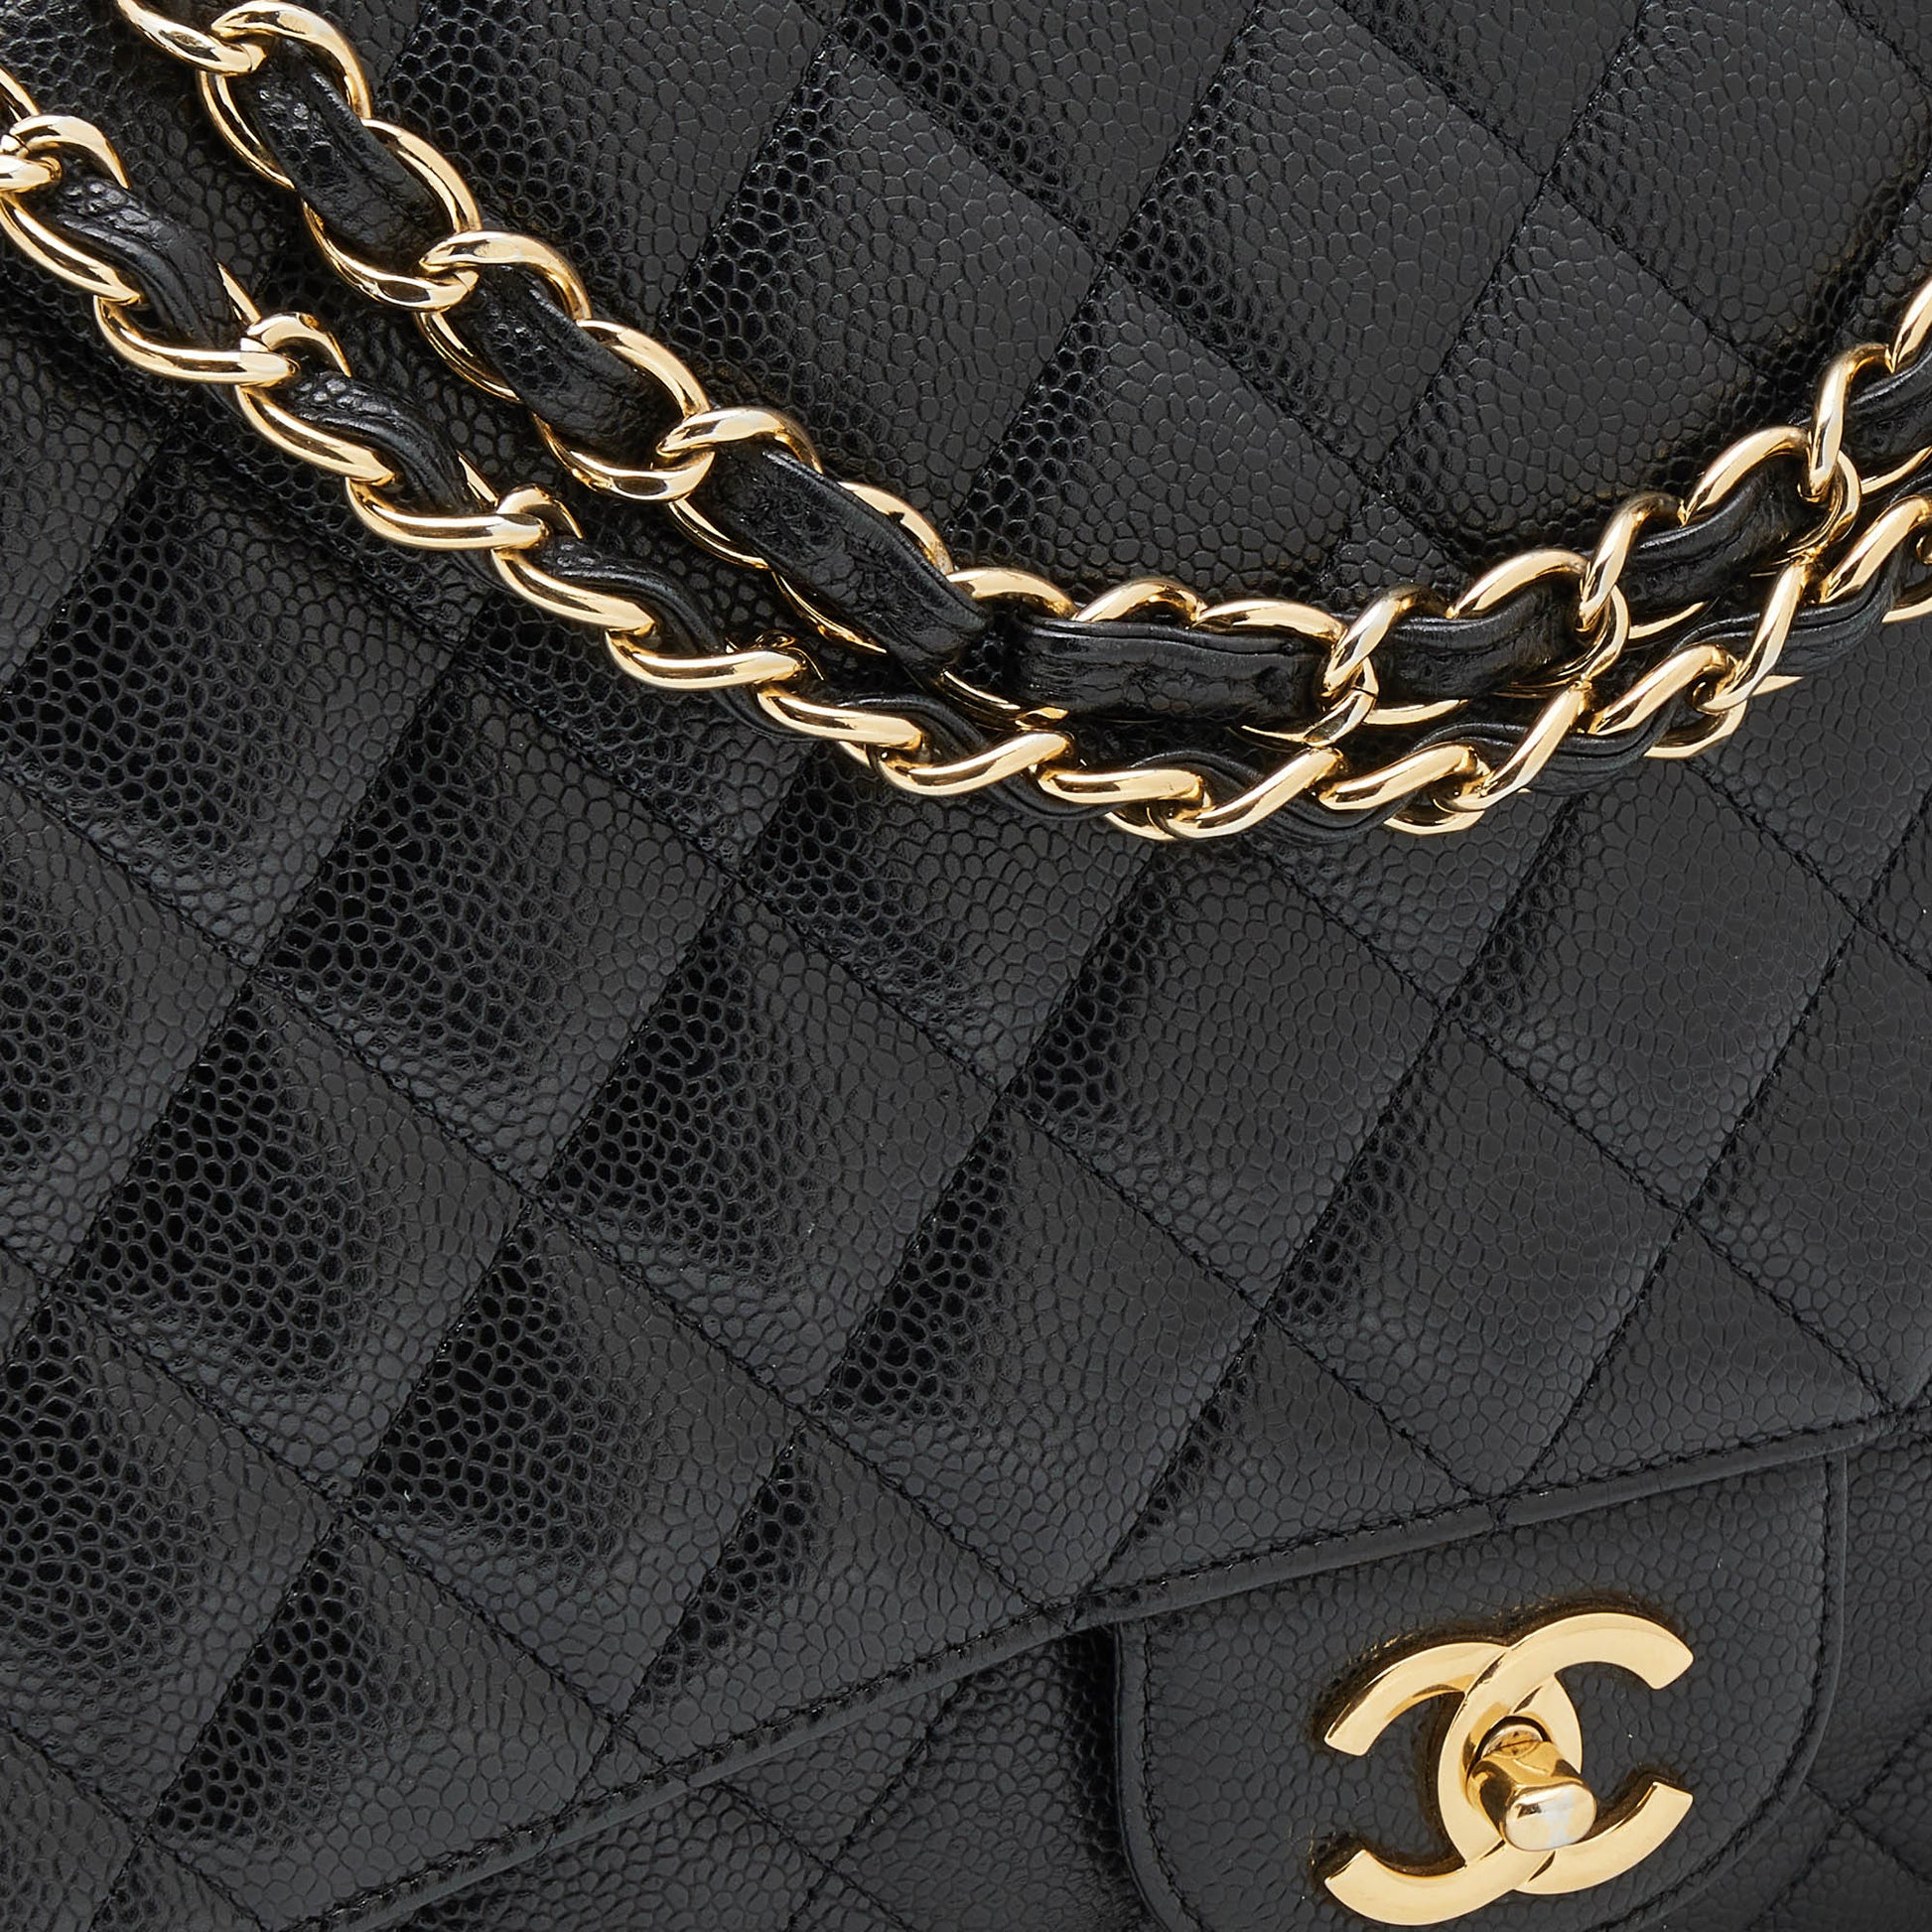 CHANEL CLASSIC FLAP MAXI (1724xxxx) BLACK CAVIAR LEATHER GOLD HARDWARE,  WITH CARD, DUST COVER & BOX